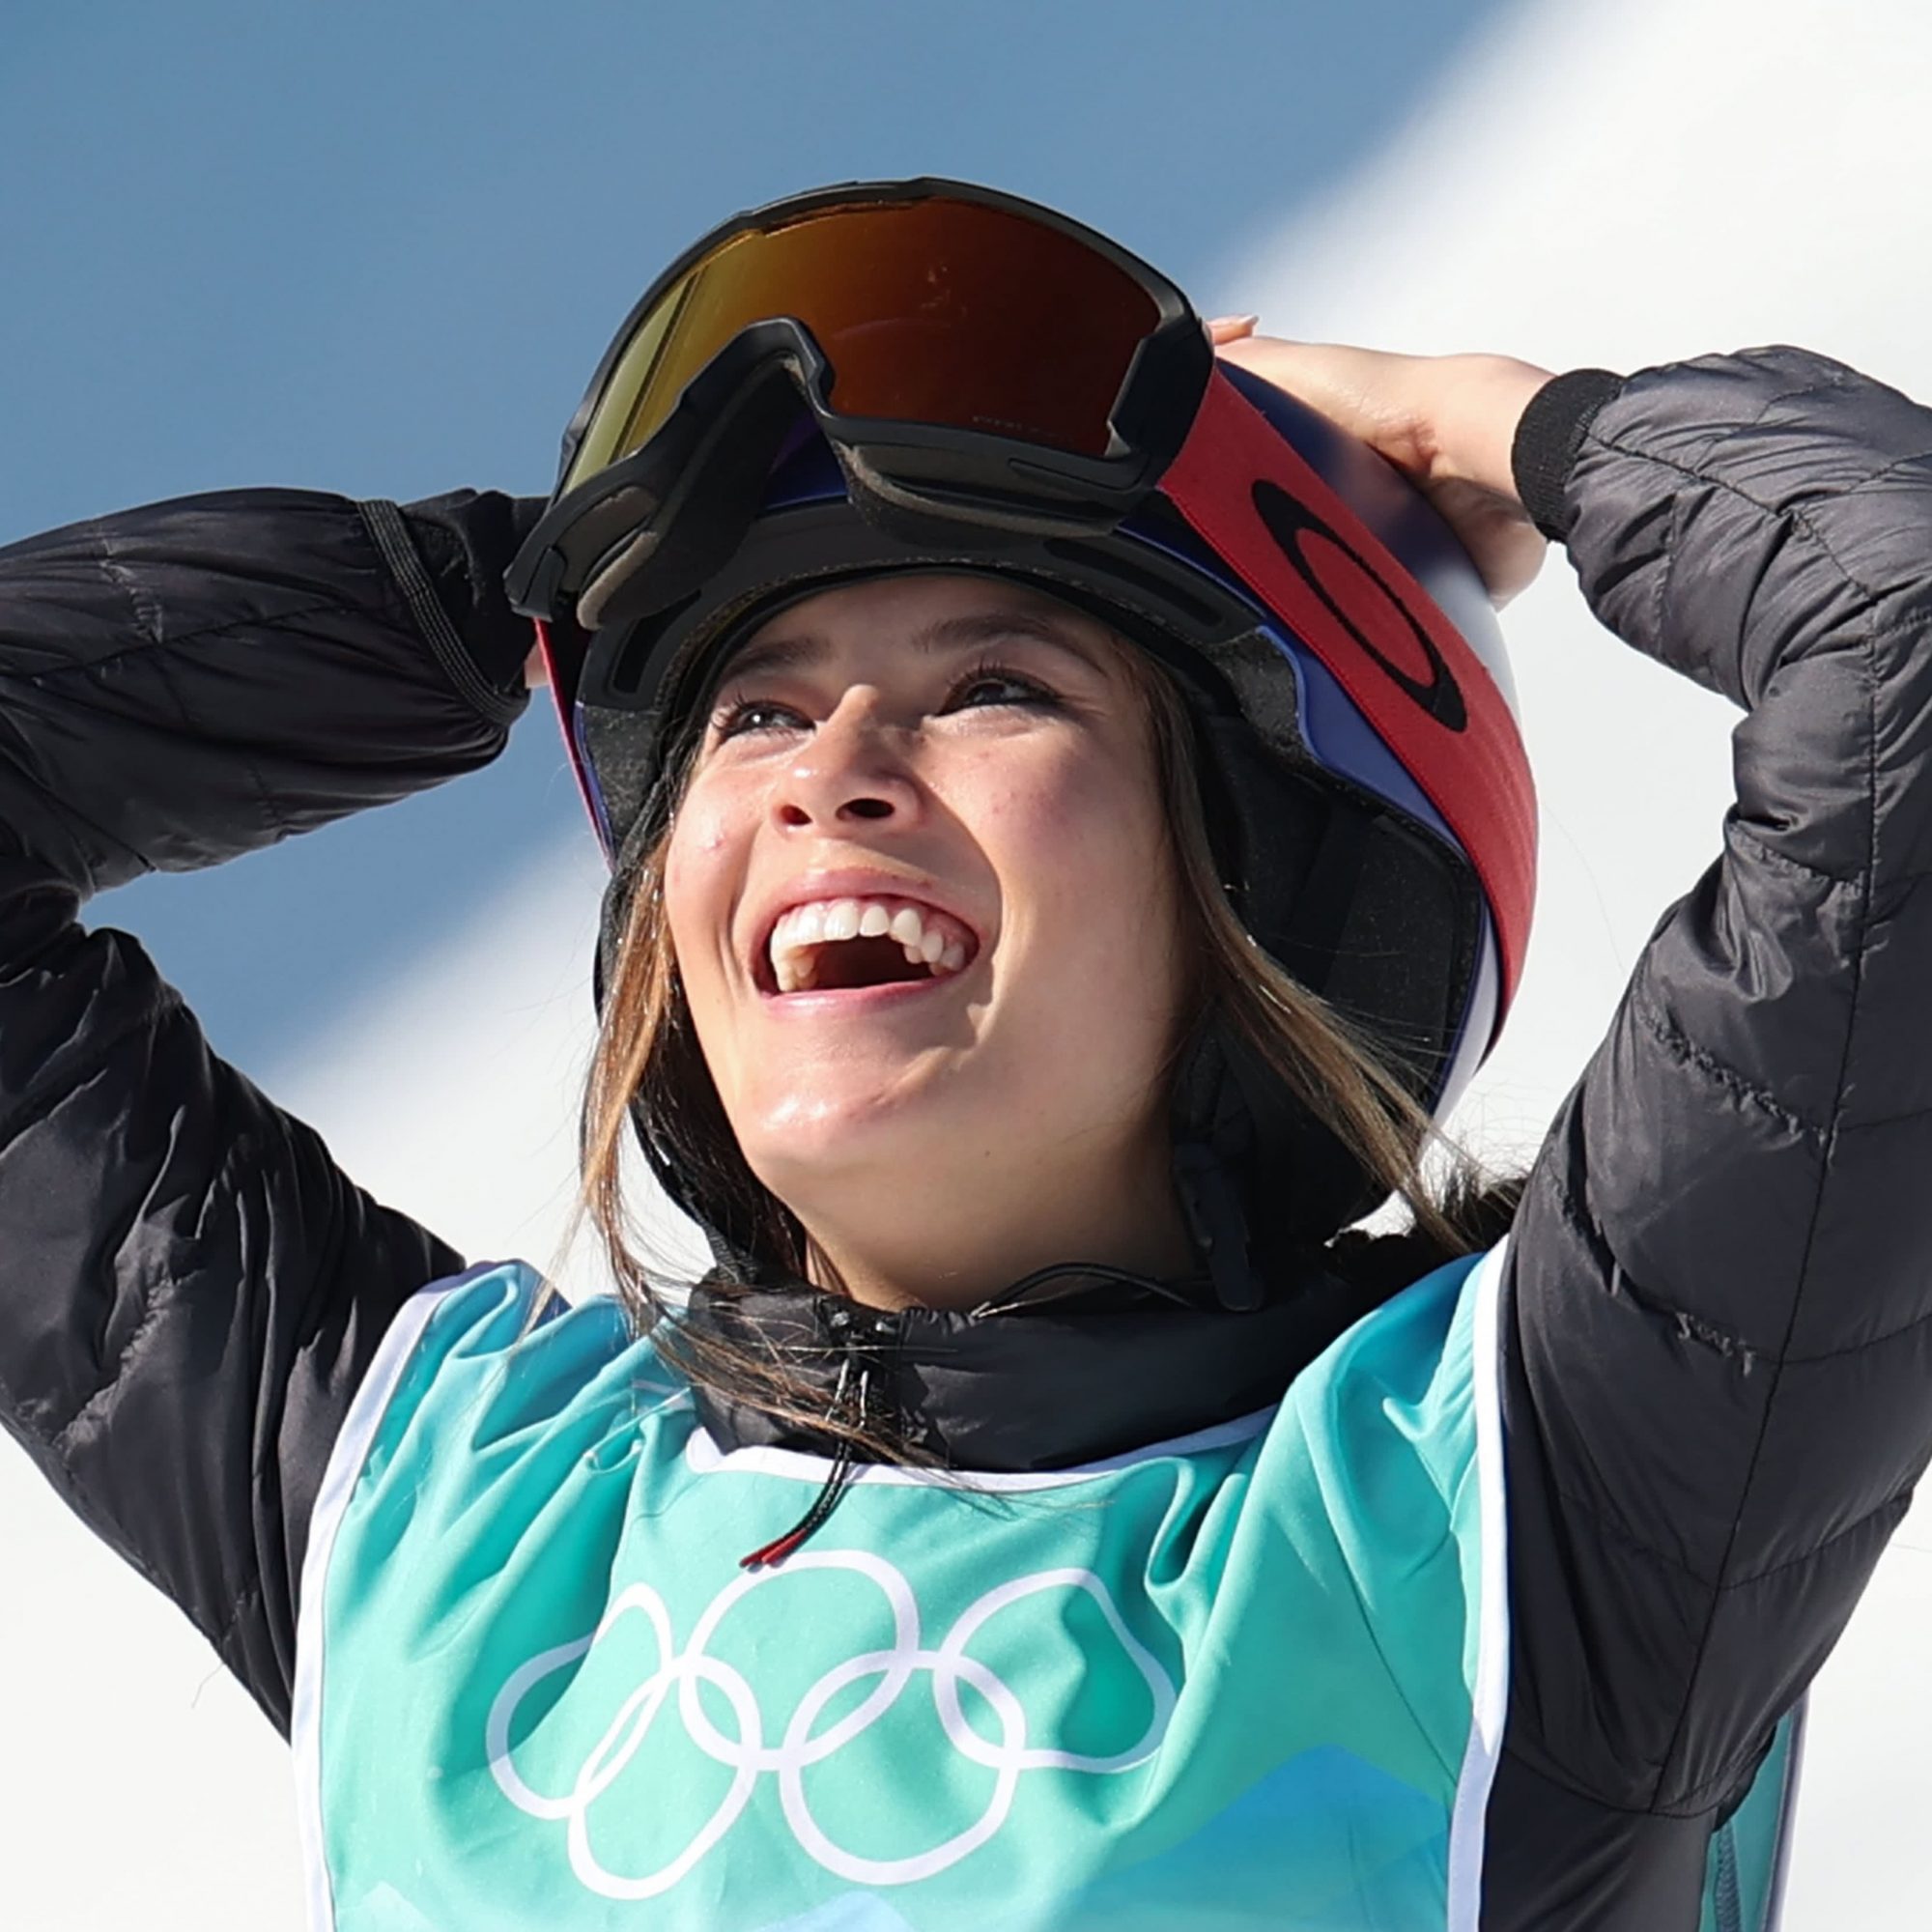 Things to Know About Olympic Skier Eileen Gu